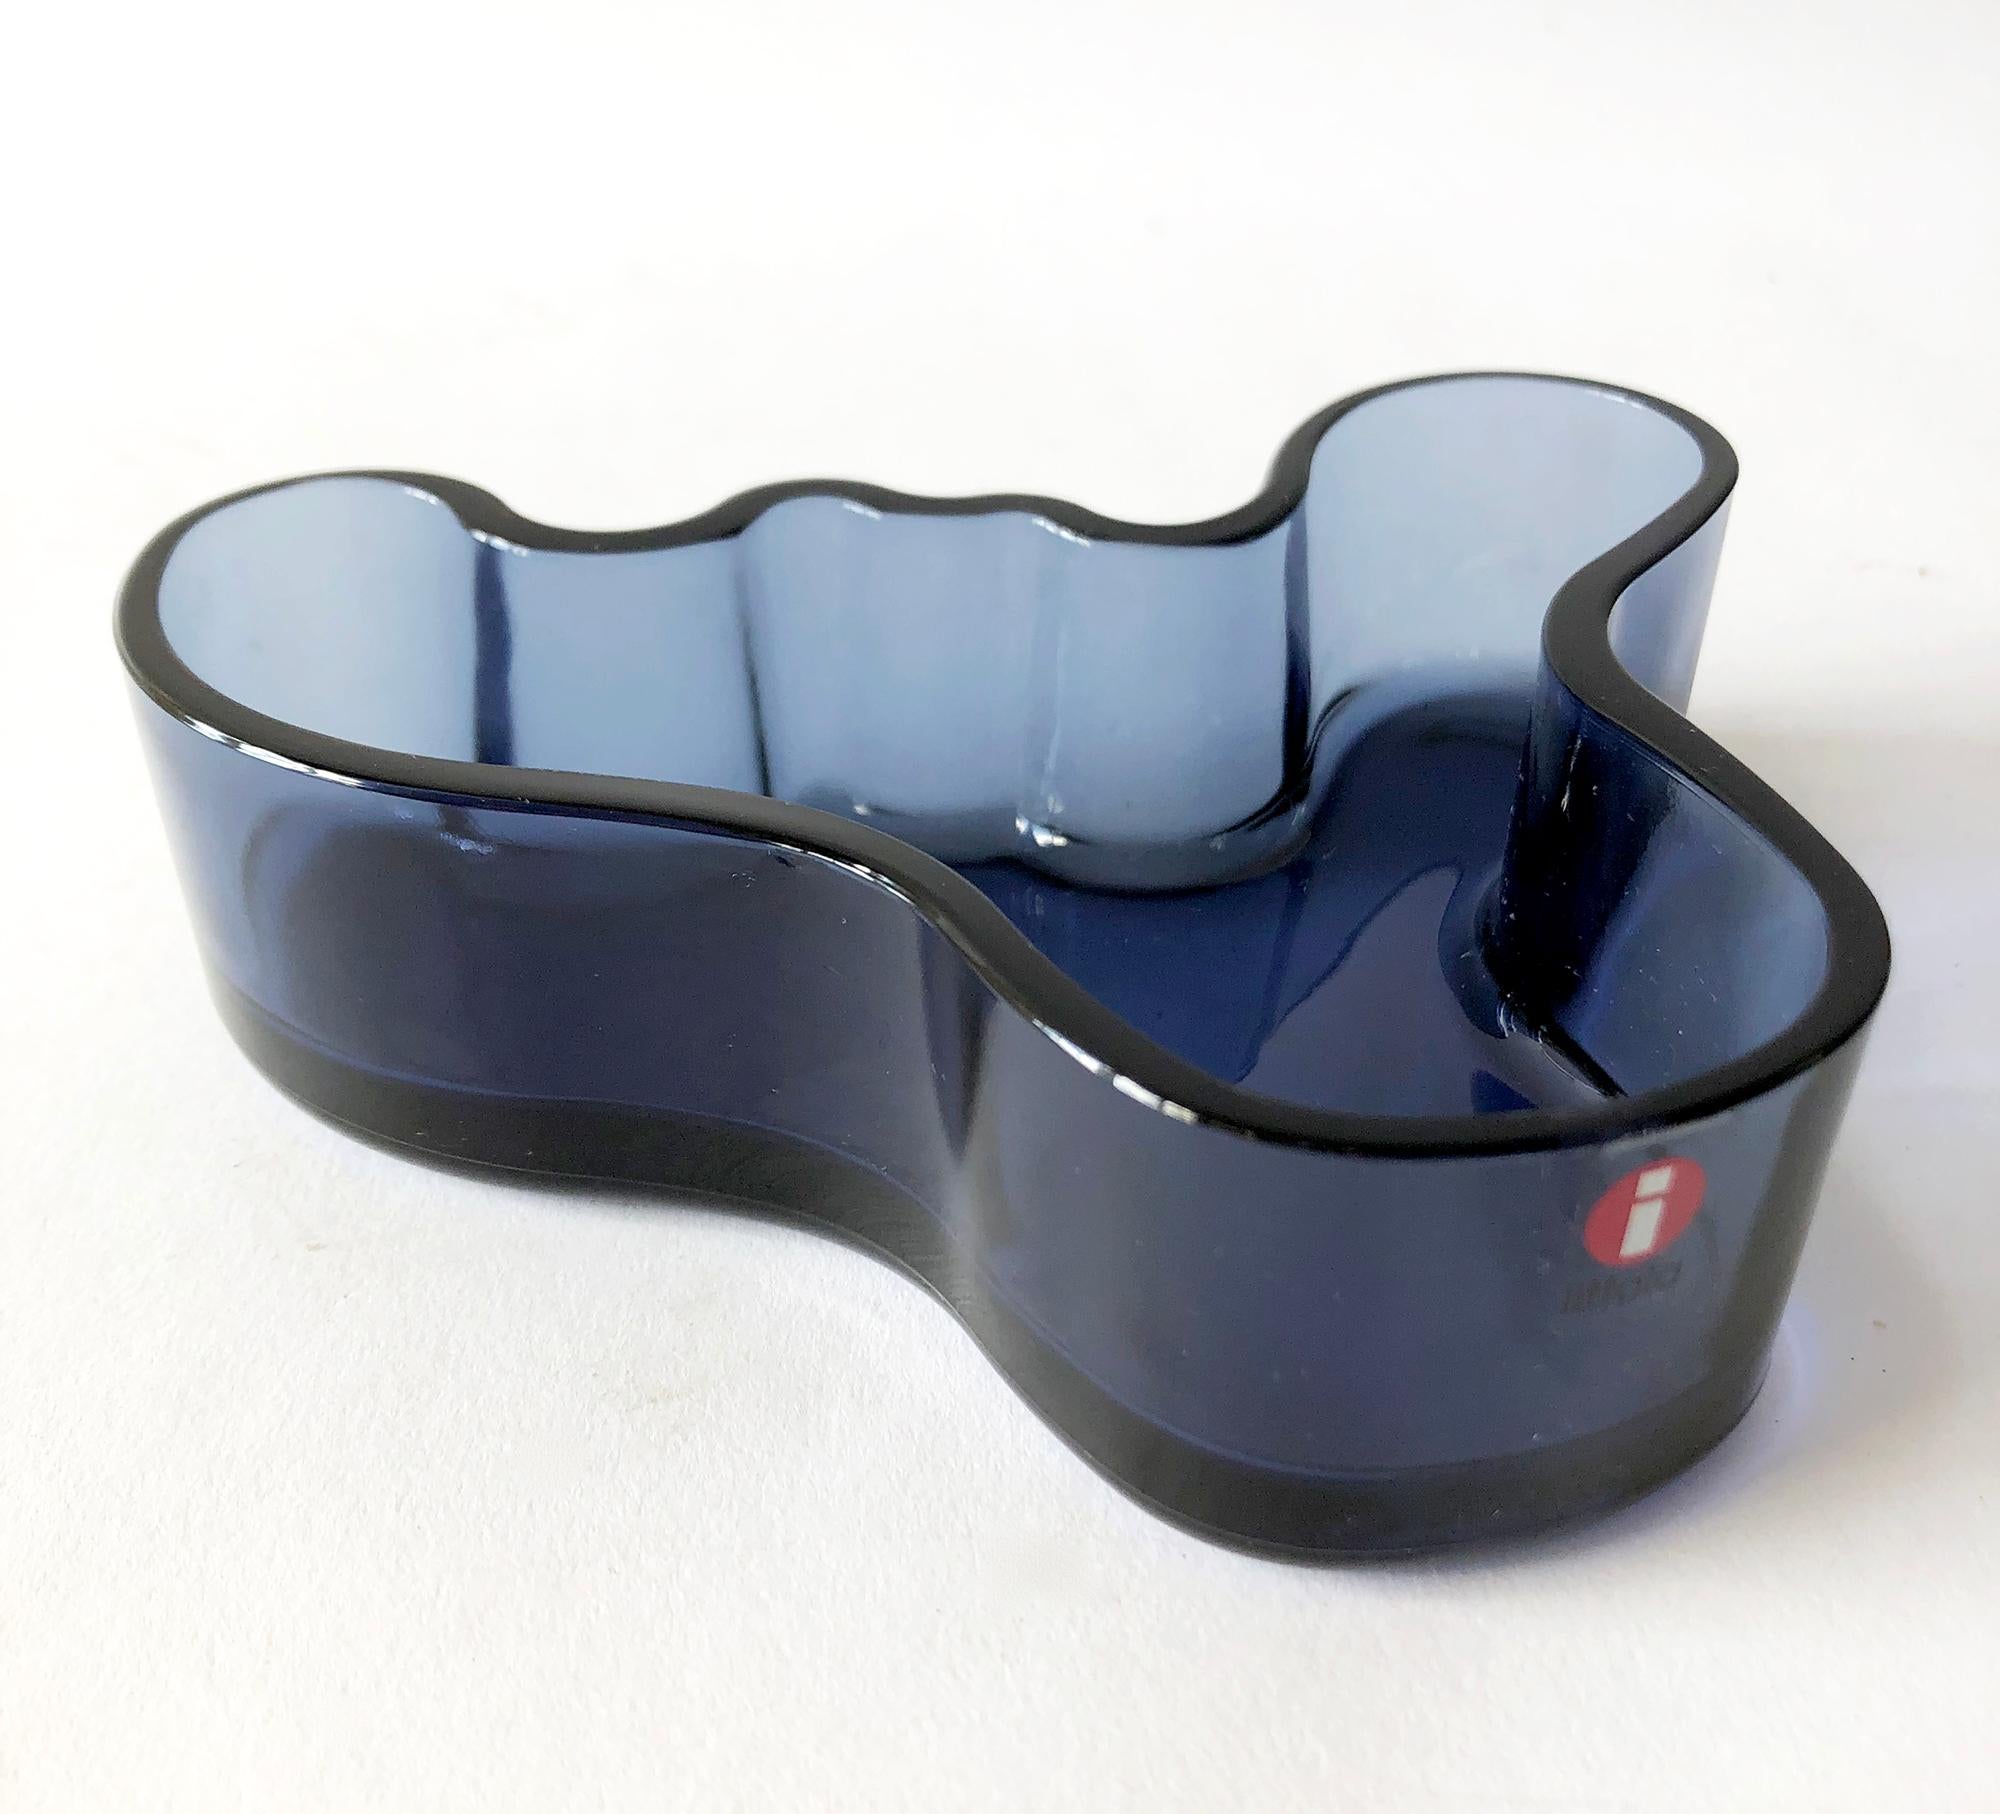 Finnish modernist Savoy vase, dish or bowl designed by Alvar Aalto for Iittala. Bowl was originally designed in 1936, this is a later version and most likely made in the late 20th century. Piece measures 1.5